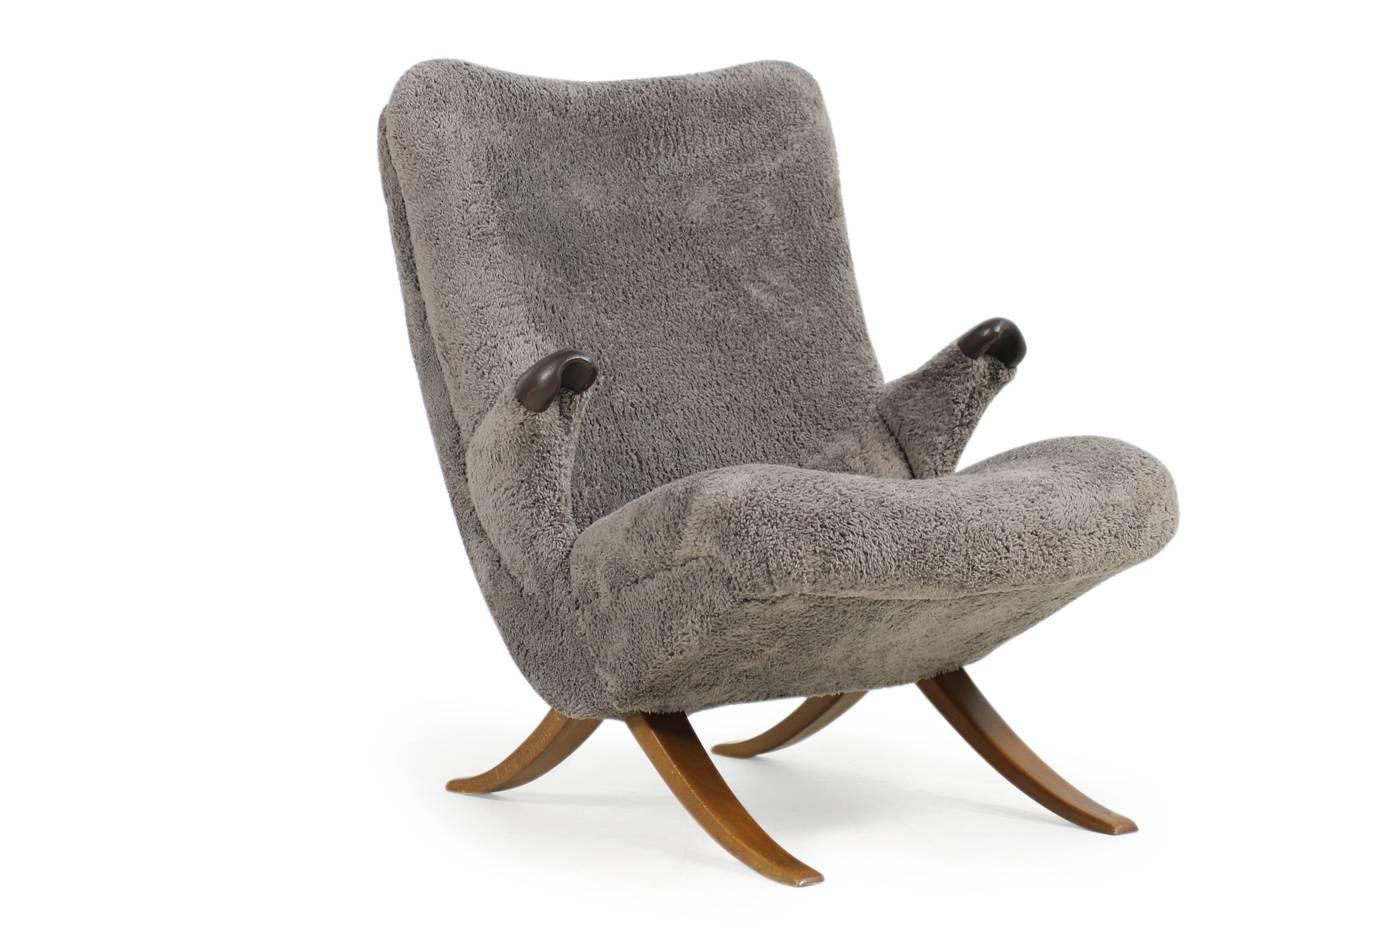 Beautiful and very rare 1950s organic lounge chair, new upholstery and covered with super soft teddy bear fabric. This lounge chair is in a very good condition. Beechwood, leather and teddy bear fur fabric. Beautiful.